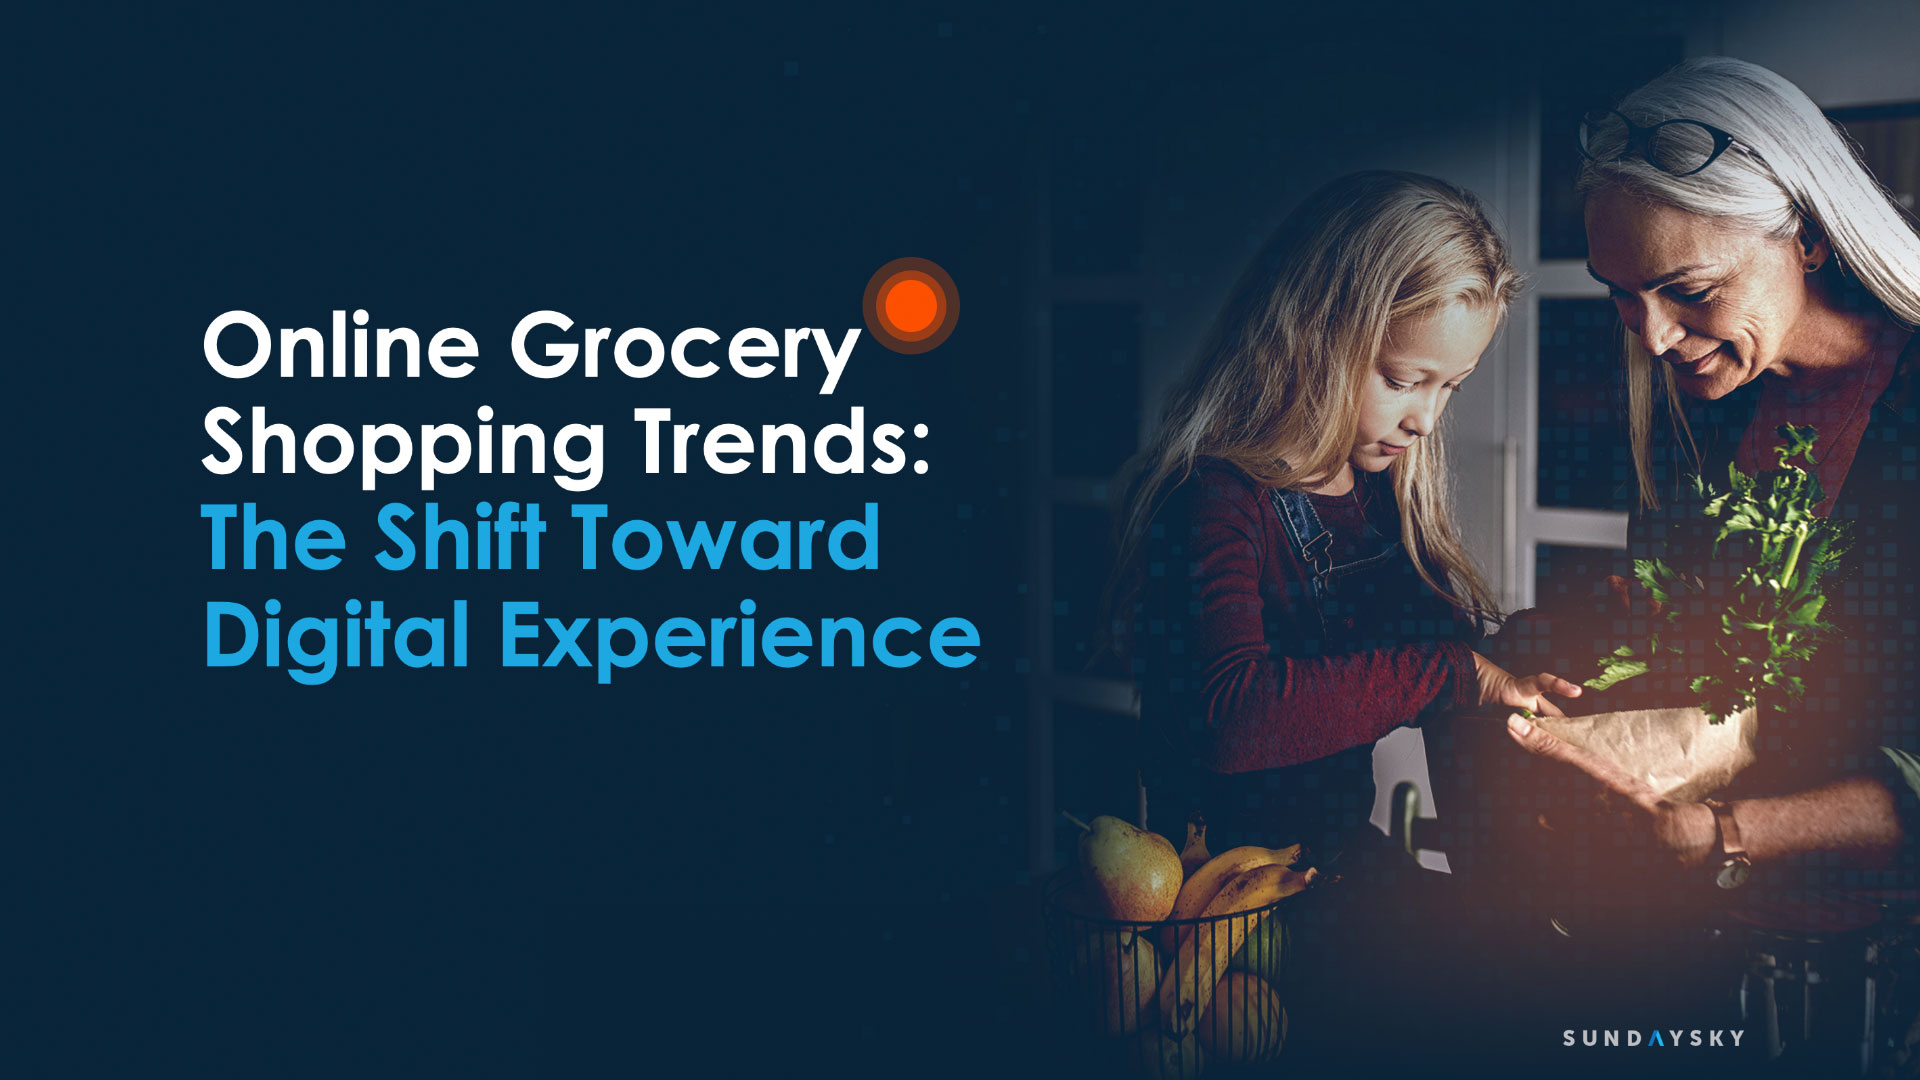 Online grocery shopping trends spans generations